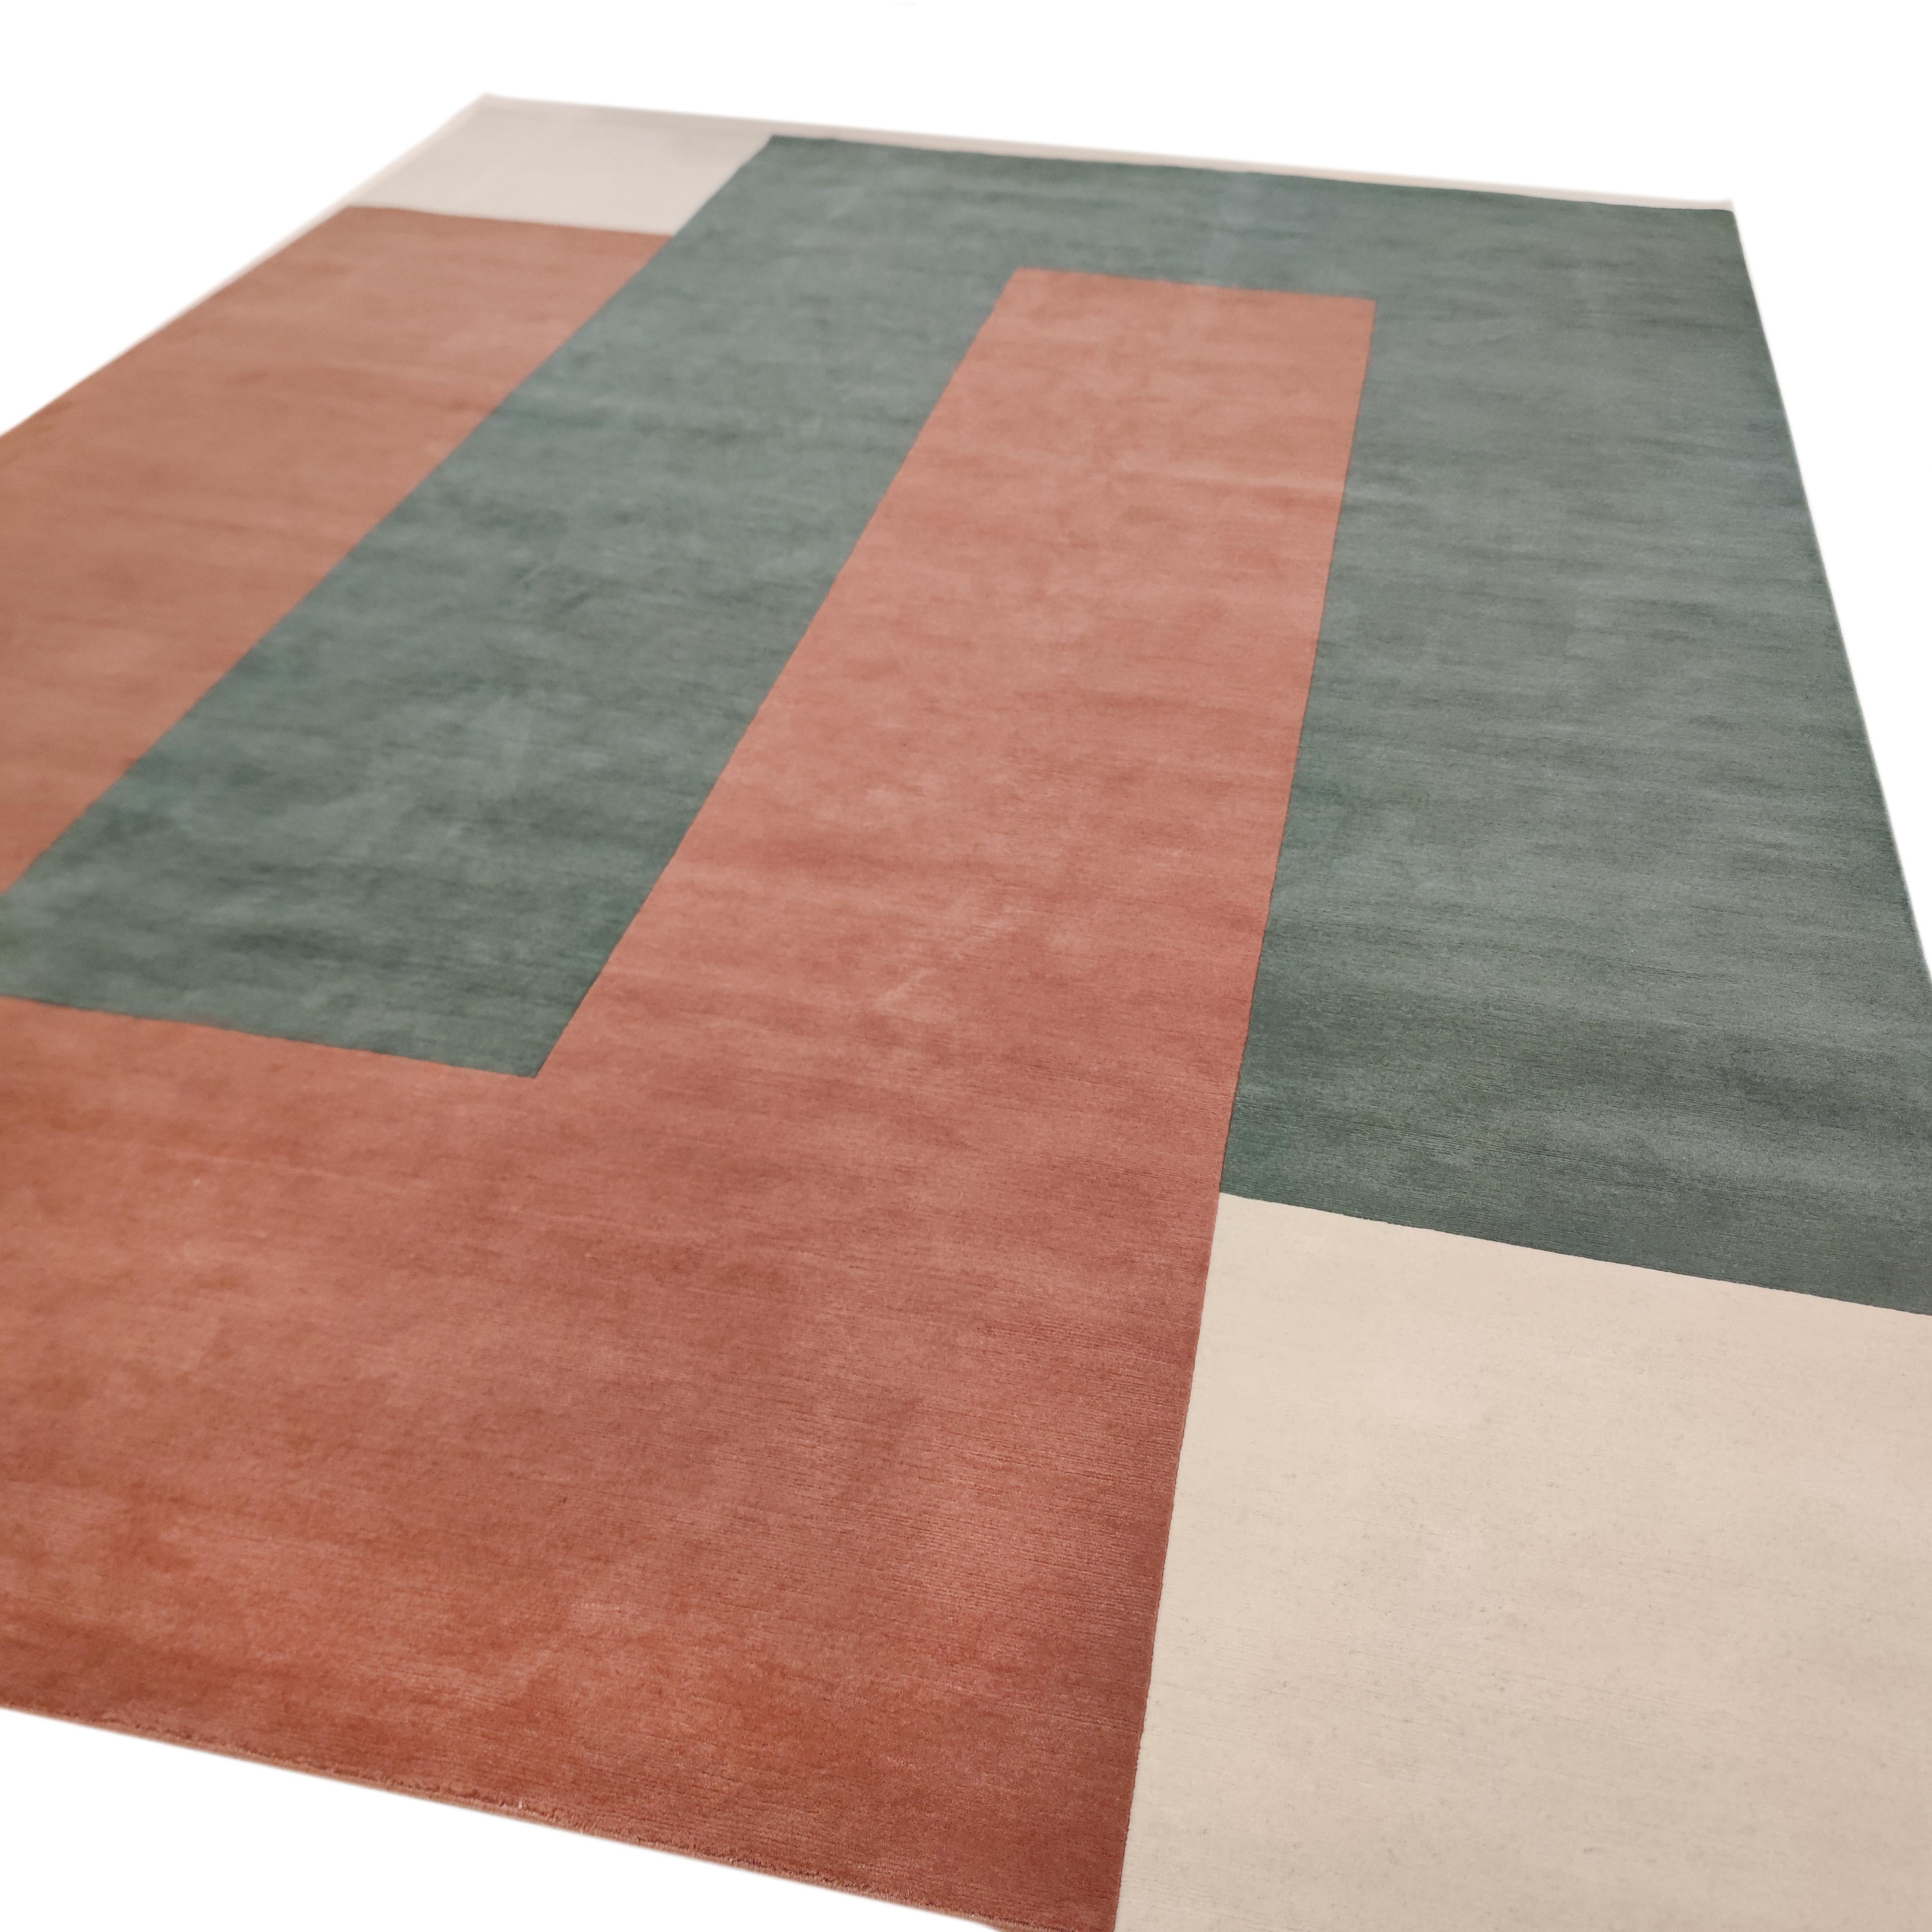 The esteemed Milanese architect and journalist Clara Bona unfurled a breathtaking dance of colours in her enthralling journey into rug design, partnering with the Alberto Levi Gallery. With her inaugural rug ensemble,  Bona showcases her creative